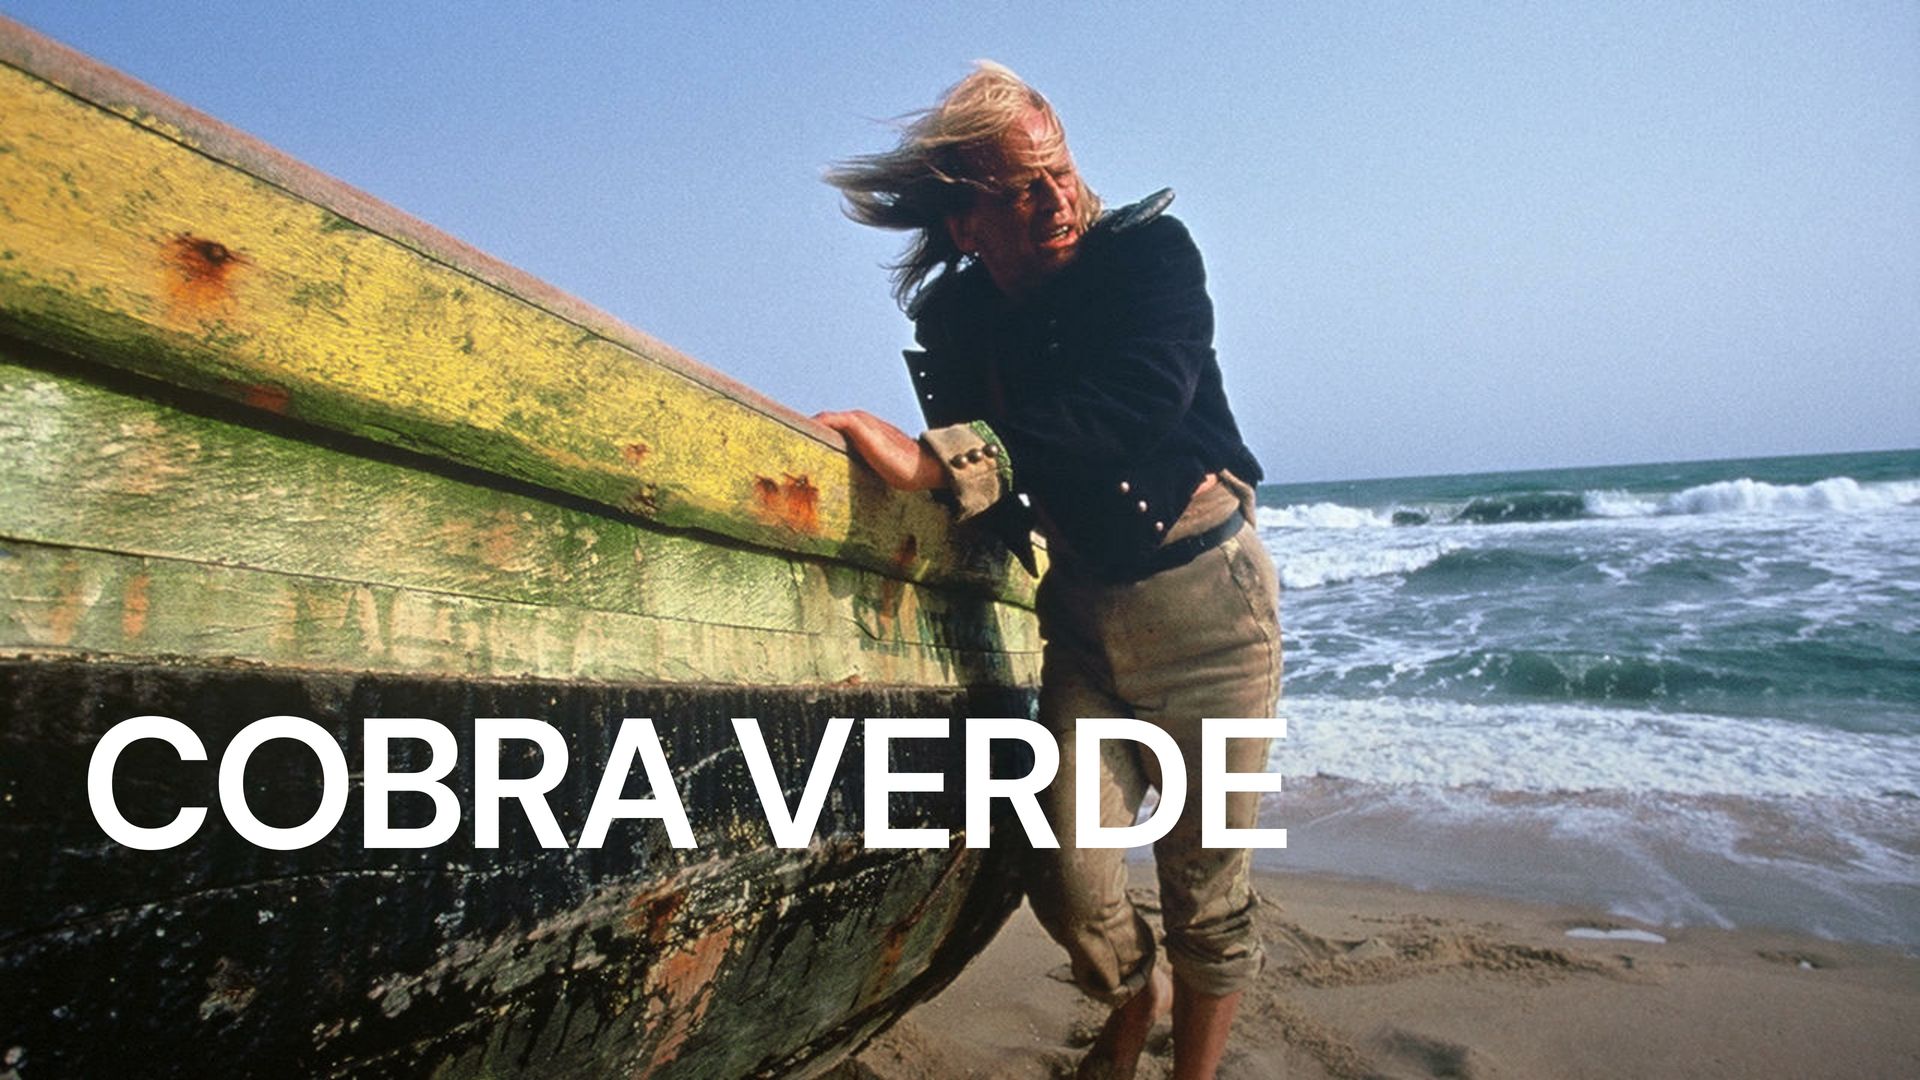 37-facts-about-the-movie-cobra-verde